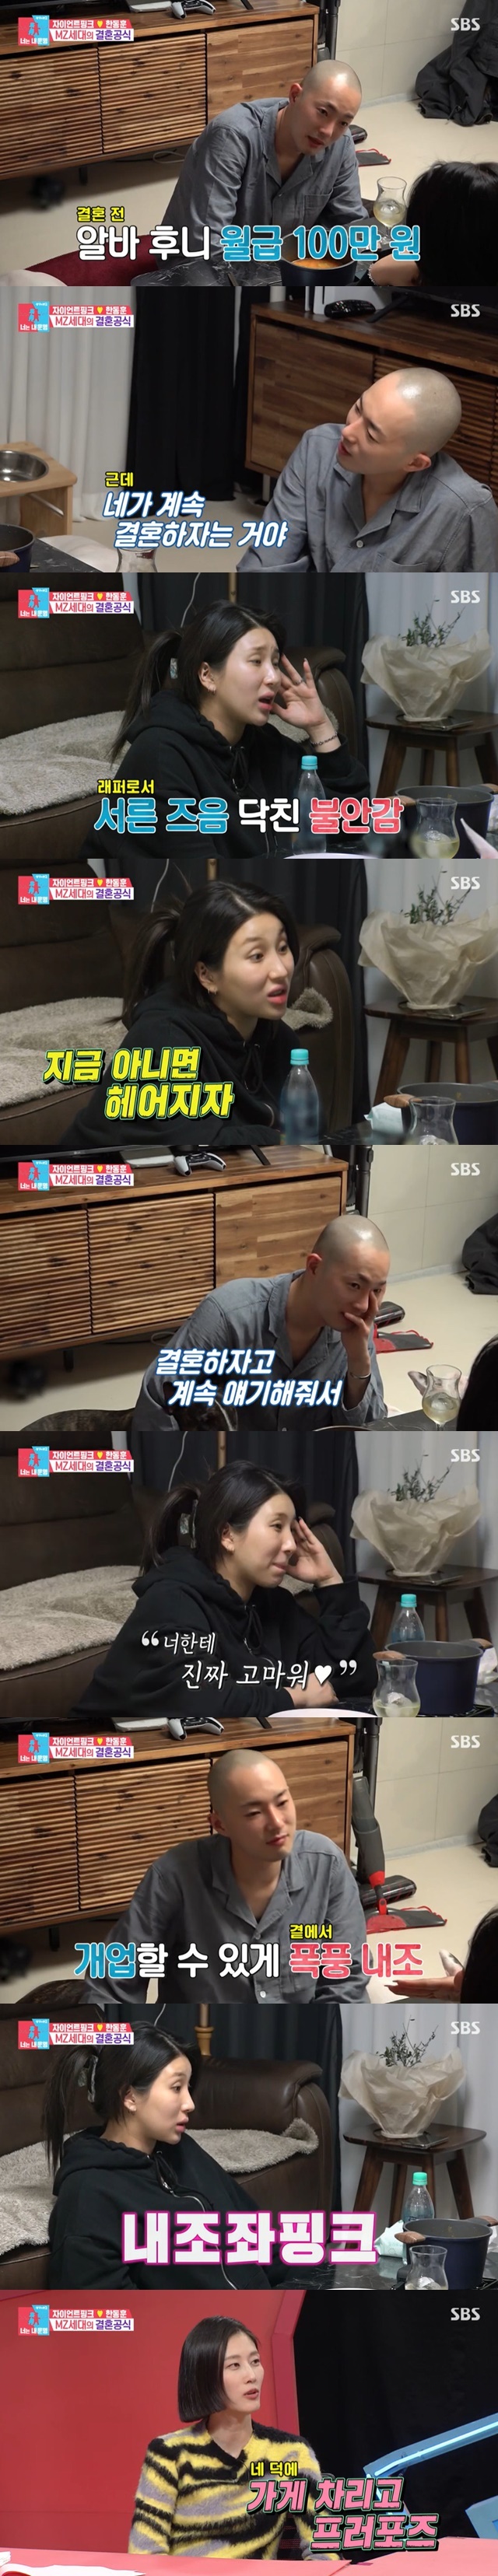 Giant Pink and Han Dong-hoon have told their love stories.On February 28, SBS Same Bed, Different Dreams 2 Season 2 - You Are My Destiny, Giant Pink and Han Dong-hoon announced their story of marriage.Giant Pink and Han Dong-hoon liked Han Dong-hoon more when they first met. Giant Pink said, The girl was a prince.Except Stephanie Herseth Sandlin, it was all about herself. She slept at Friends when she was gone.So I broke up, he said, saying that he had said that he had separated first, exploding the anger that he had accumulated to Han Dong-hoon on the 200th day of Love.The couple then accidentally made The Slap four years later.Giant Pink went to Pyeongtaek to meet Friend with a recognition after appearing in Until Pretty Rap Star, and then I met Han Dong-hoon at a bar, and Han Dong-hoon said, Can I sit here?Giant Pink said, Ive changed a lot.In the old days, I had a high self-esteem in self-indulgence, so I was like Stephanie Herseth Sandlin, but I know that I can be a strong man and care.I drank, and I thought Id get you some tissue. I thought you said alcohol was flying.The thing that was done was washed away, Confessions said.Its so famous, and its just like it was before, and Ive felt like it again, and I still thought it could be so pure, Han Dong-hoon said.So the Slap couple fought every day for four years of Love but said they were happier after marriage.Im really happy to marriage, Han Dong-hoon said, but I earned a million won a month, and you keep asking me to marriage.How do you marriage a girl who earns 1 million won? Giant Pink said, I had a marriage in my 30s when I asked for marriage. My dear lady did not think about marriage.Im thirty-six and I dont have the guarantee of marriage with him, he said.Would you be happy because youre marriage? I thought you werent happy at all. If Im not so happy, Ill fight.I made excuses to avoid it. Marriage would make me a working life, but I didnt want to. Thank you for sticking to Marriage.Thank you very much, Confessions said.Han Dong-hoon said, Thanks to Giant Pink, I opened a restaurant and then I made a proposal. Han Dong-hoon said, I just made 2 million won.Ive had 200 bucks in my bankbook. If youre going to be so hard, marriage, lets join your life.The courage to do the proposal was a celebrity, but it was fresh to ask a kid who earned 1 million won a month to marriage.Who is this pure child? 